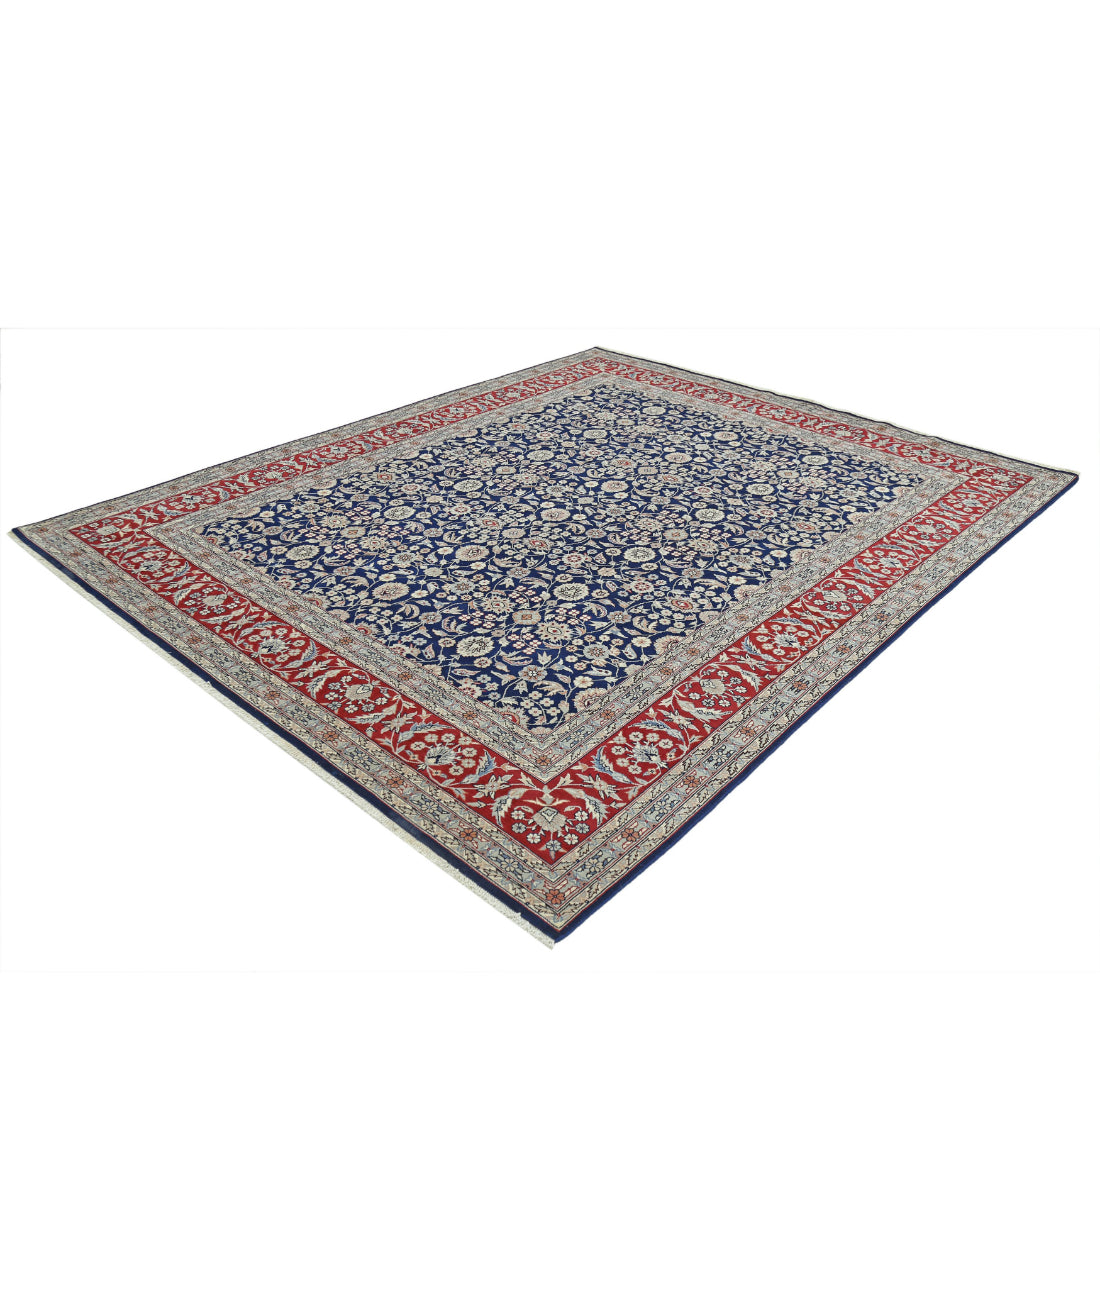 Hand Knotted Heritage Persian Style Tabriz Wool Rug - 8'0'' x 9'10'' 8'0'' x 9'10'' (240 X 295) / Blue / Red